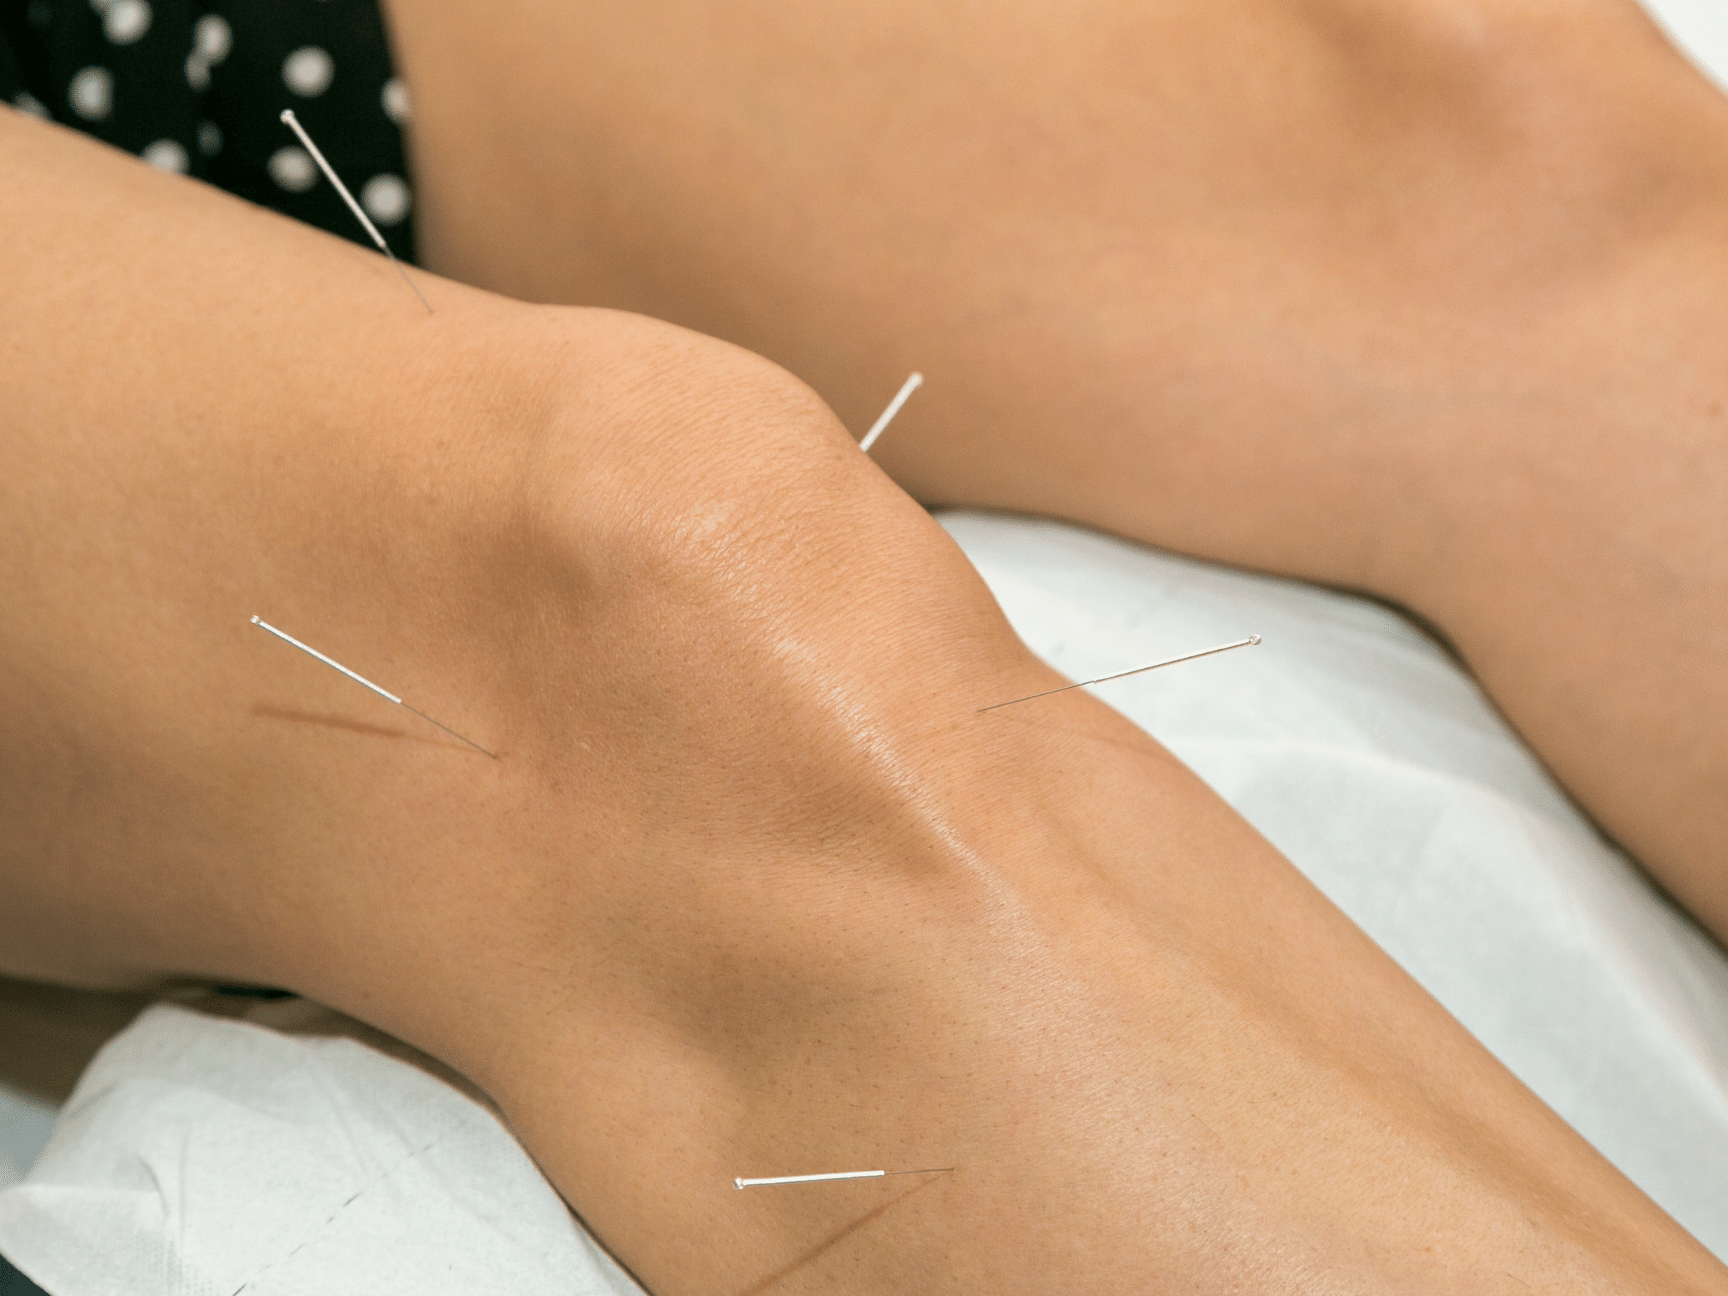 https://onerehab.com/wp-content/uploads/2022/12/dry-needling-therapy-.png